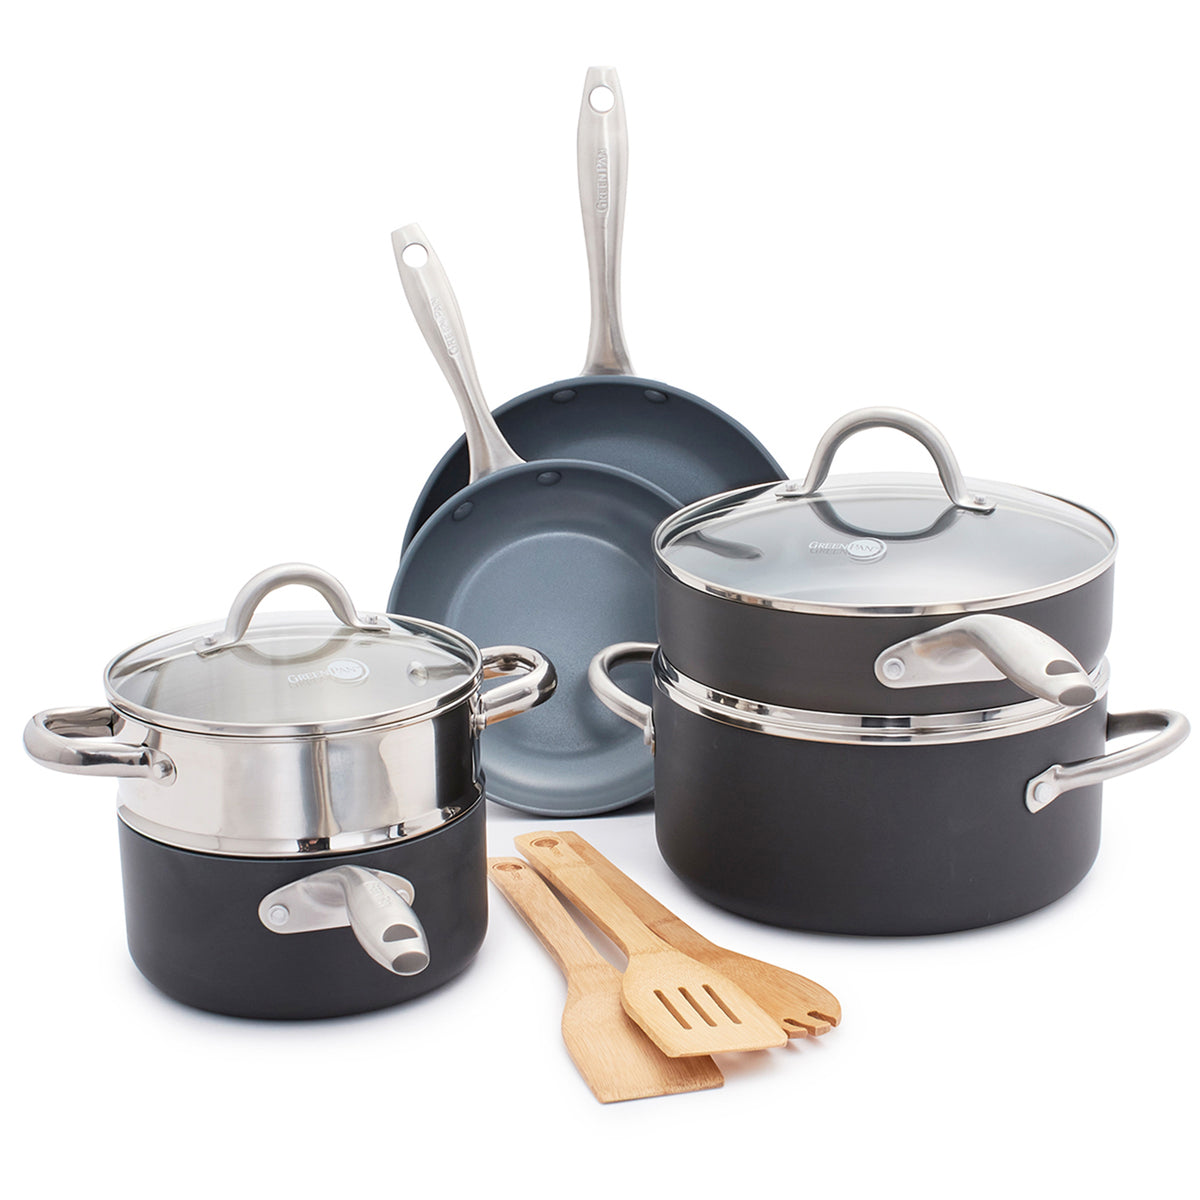 Induction Stainless Steel w/Hard-Anodized Cookware Set